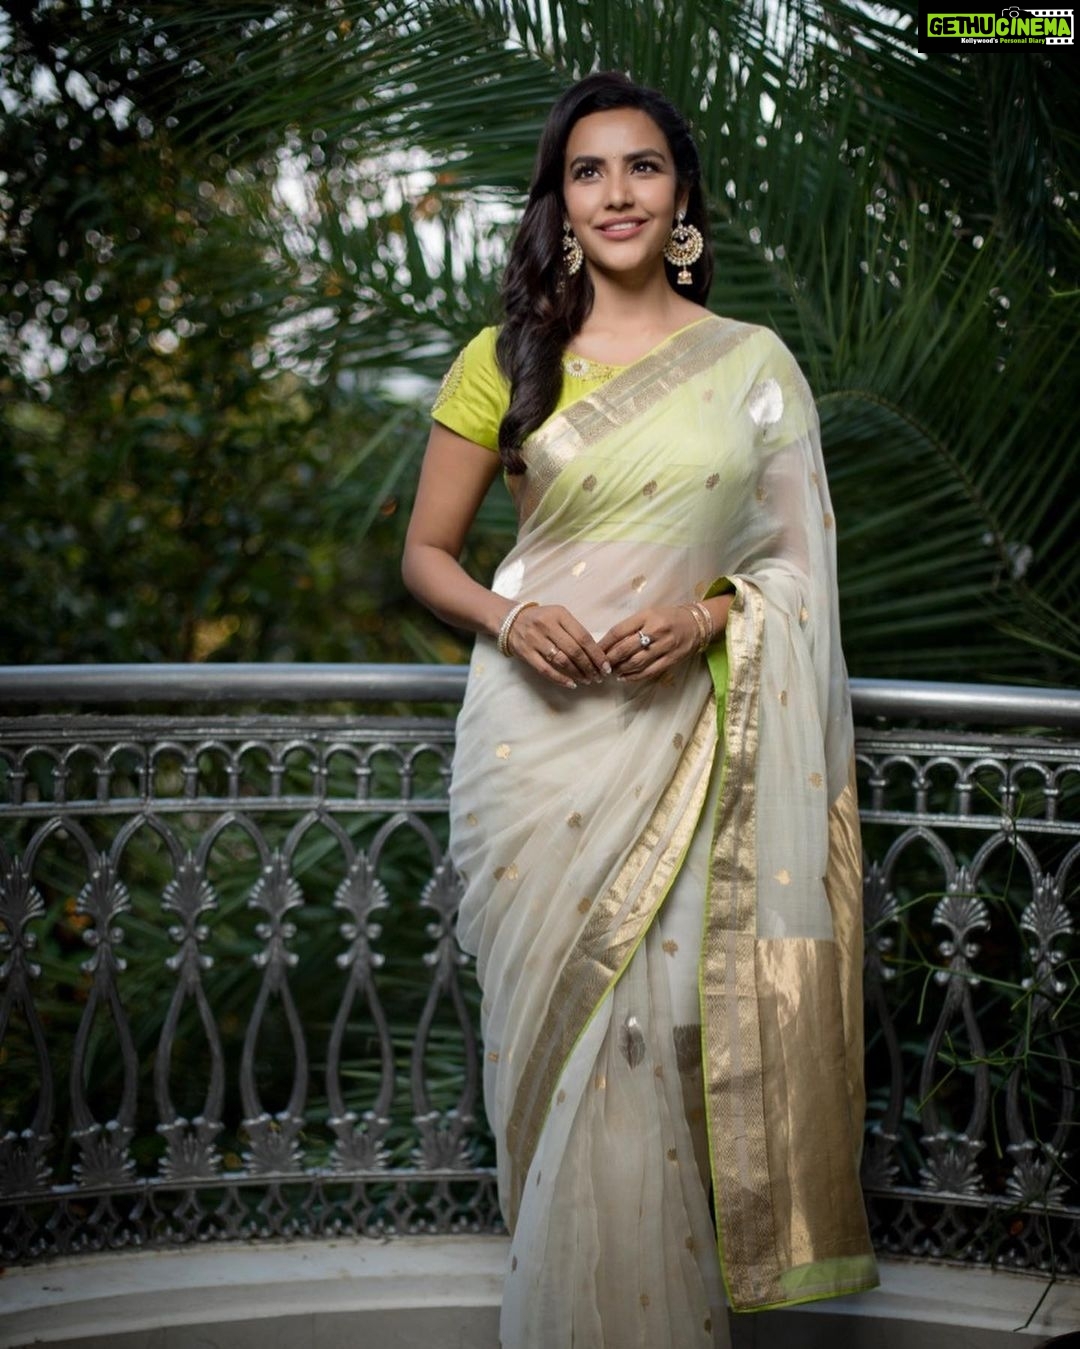 Priya Anand - 109K Likes - Most Liked Instagram Photos